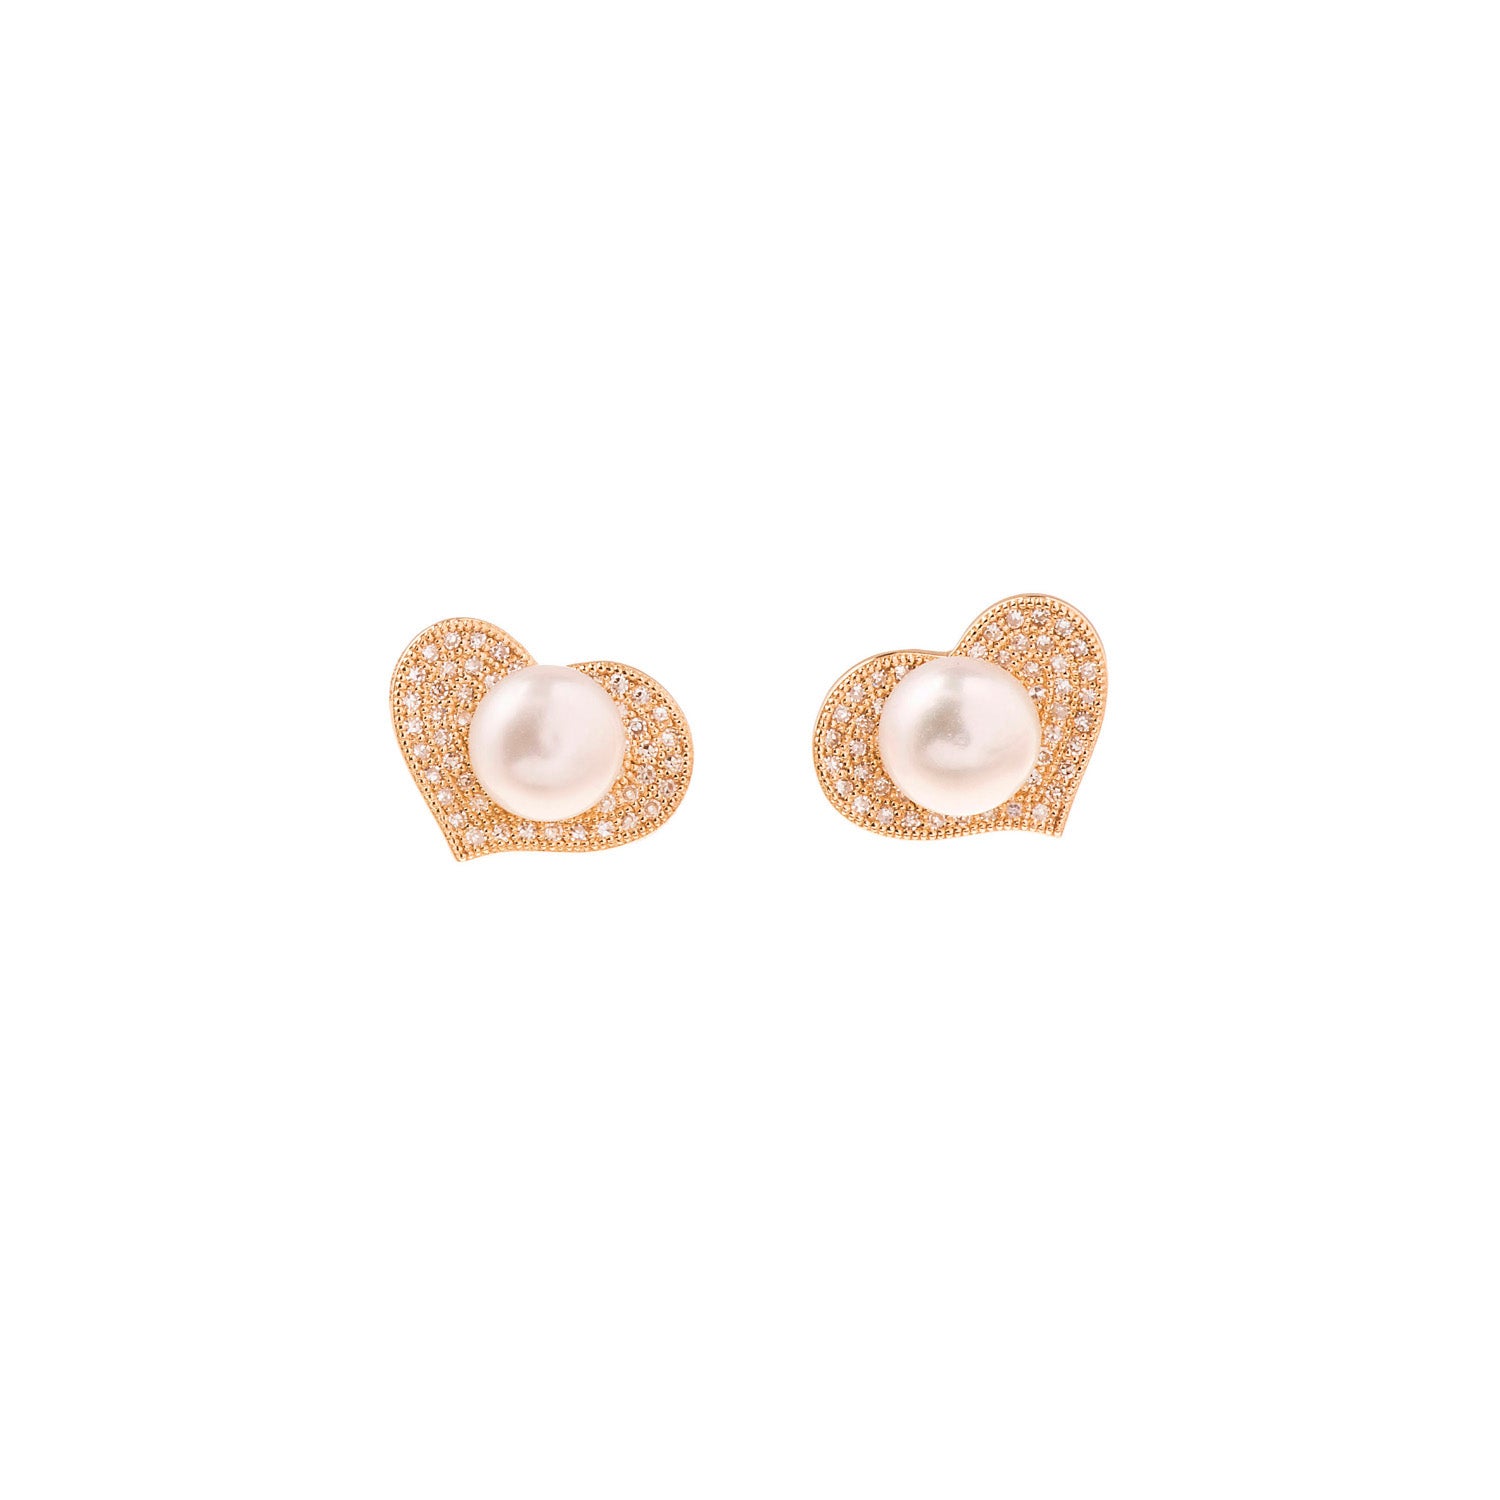 Pearl Earring. Earrings. 18K gold earring. Fresh water pearl. White Gold, yellow gold, rose gold. Perfect Gift. Earring gift. Hanging Pearl. Chain Erring. Fine jewelry. Anatol. Σκουλαρίκι χρυσό. Σκουλαρίκι  με μαργαριτάρι. Σκουλαρίκι αλυσίδα. Σκουλαρίκι με πέρλα. Athens.